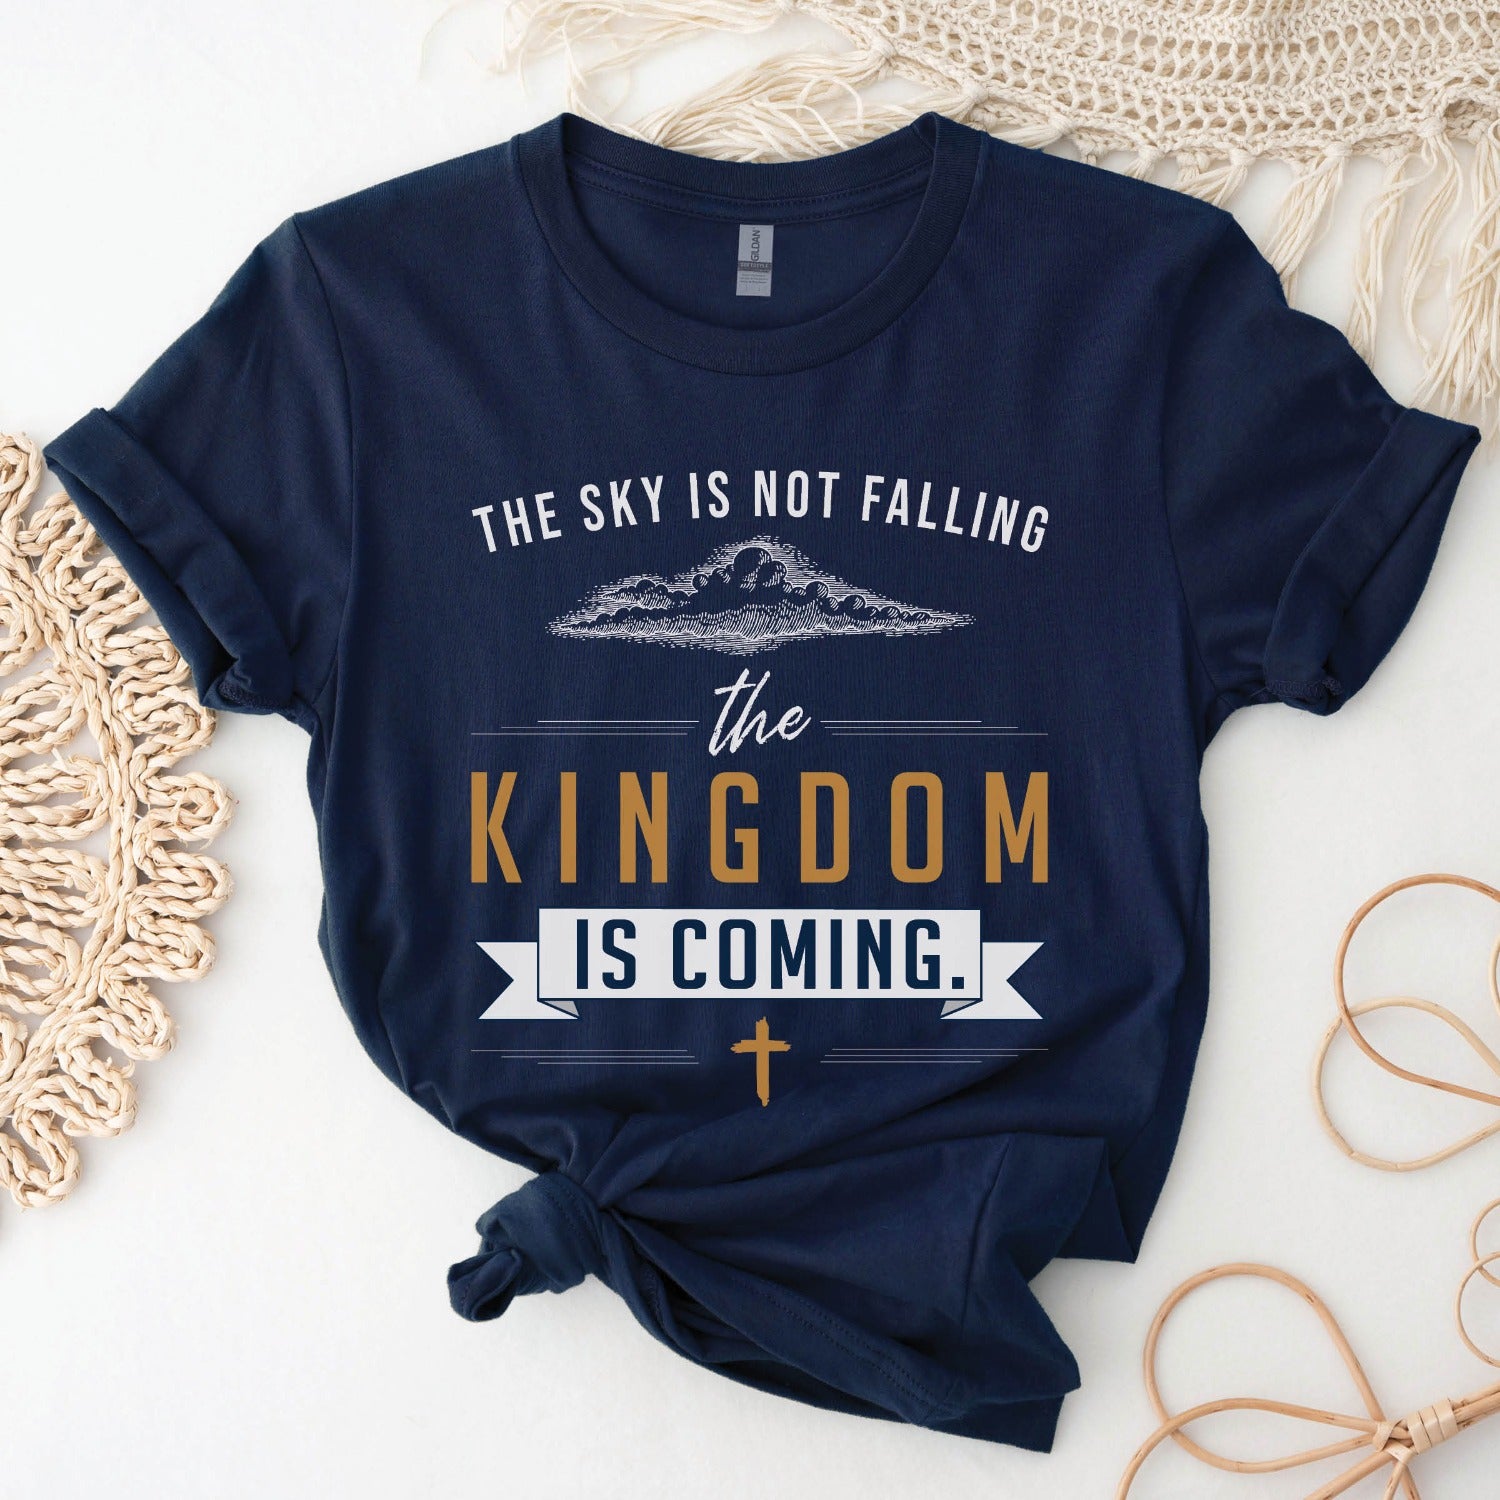 Navy blue unisex t-shirt with a Christian Kingdom of God through Jesus faith-based message that says, "The Sky Is Not Falling, The Kingdom is Coming" with bold font, vintage clouds, banner, and cross design in white and gold, created for bible study Men and Women believers, 2024 eclipse